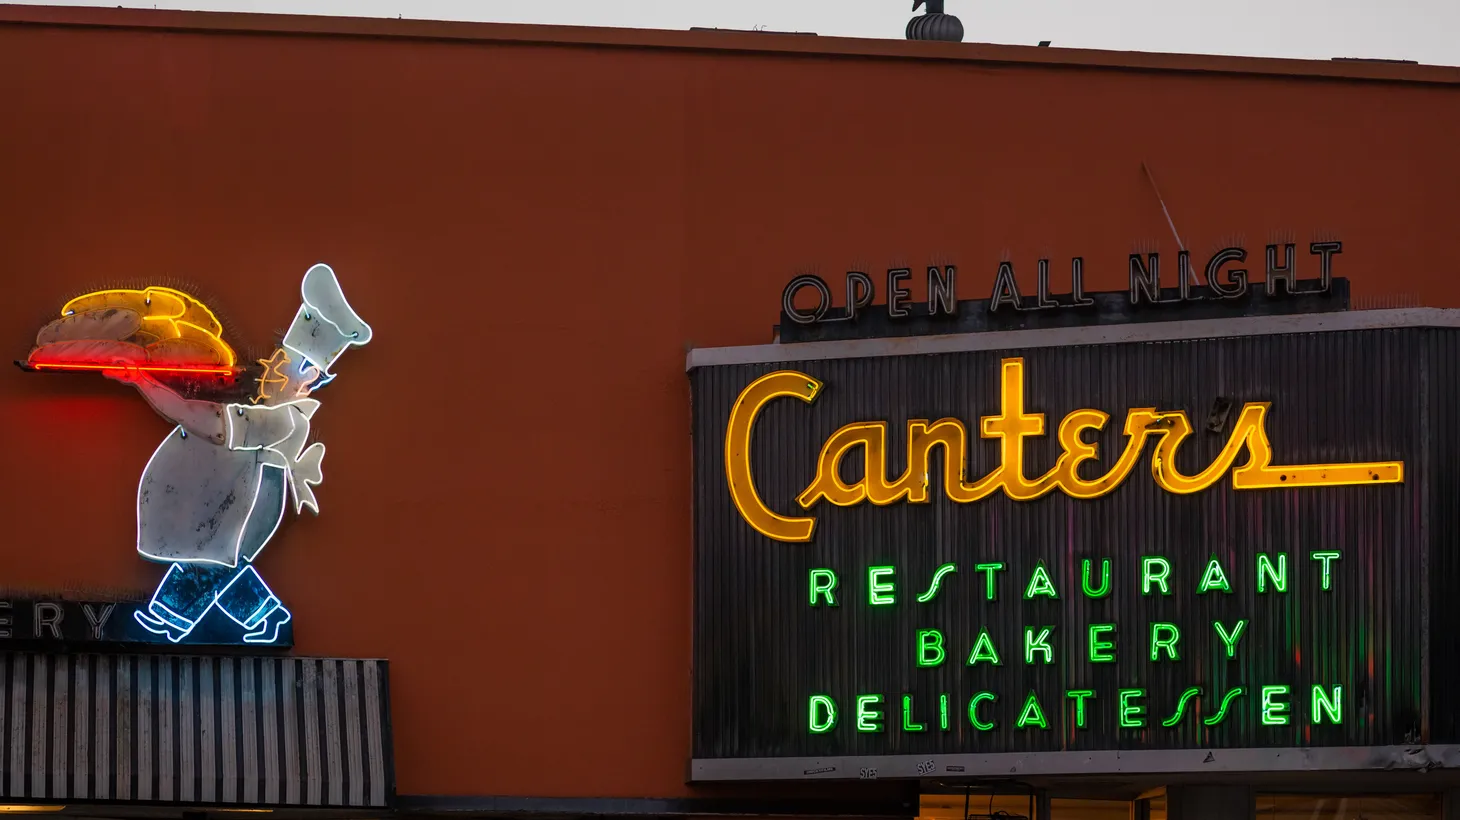 The entrance of Canter’s Deli, built in 1931, features a big neon sign advertising that the restaurant is open all night.